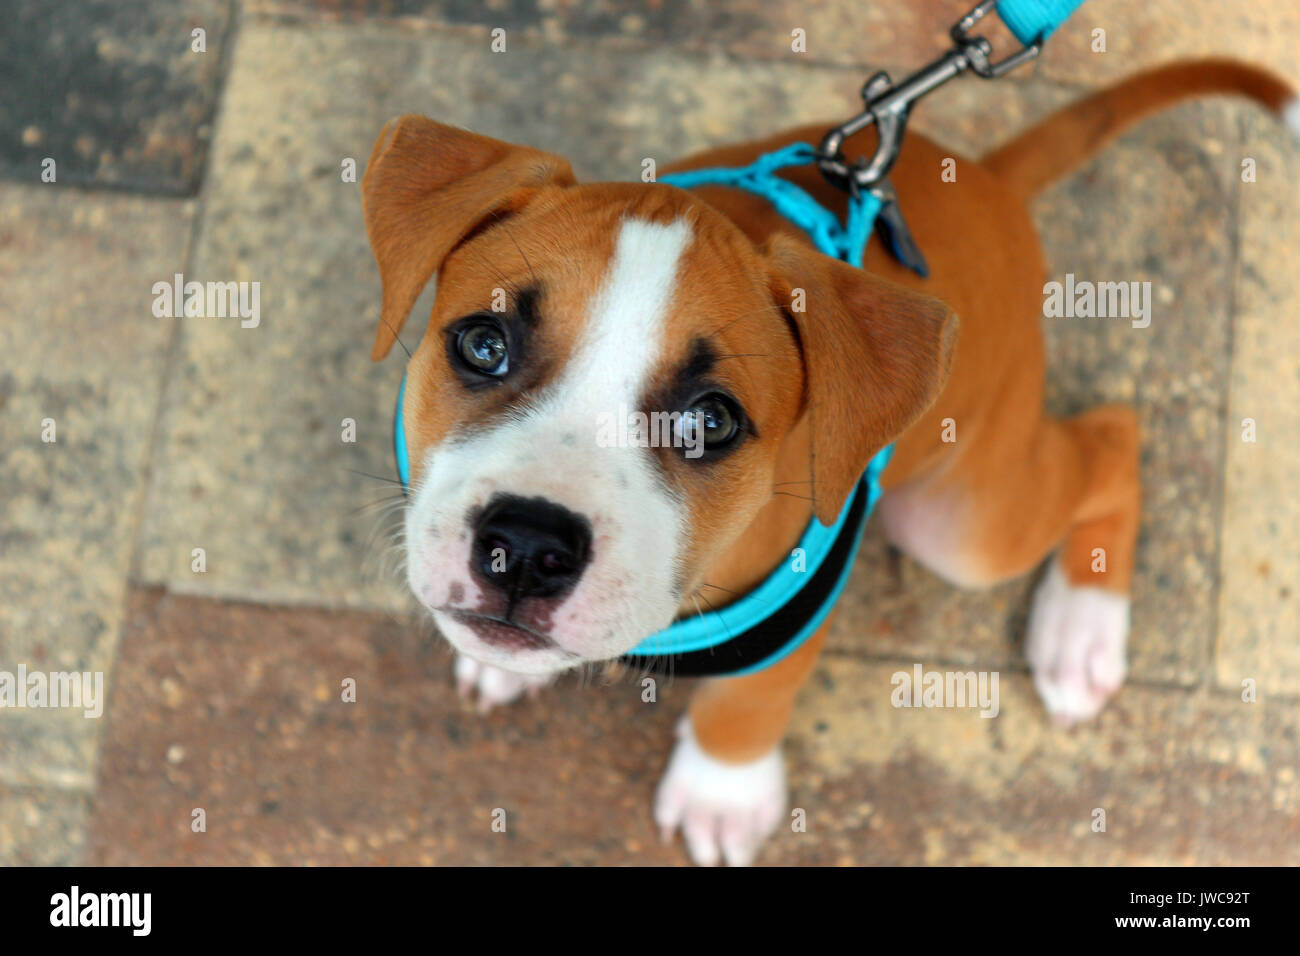 A Very Young Pit Bull Puppy with a Blue Leash and Harness On his First Walk Being Trained. Stock Photo